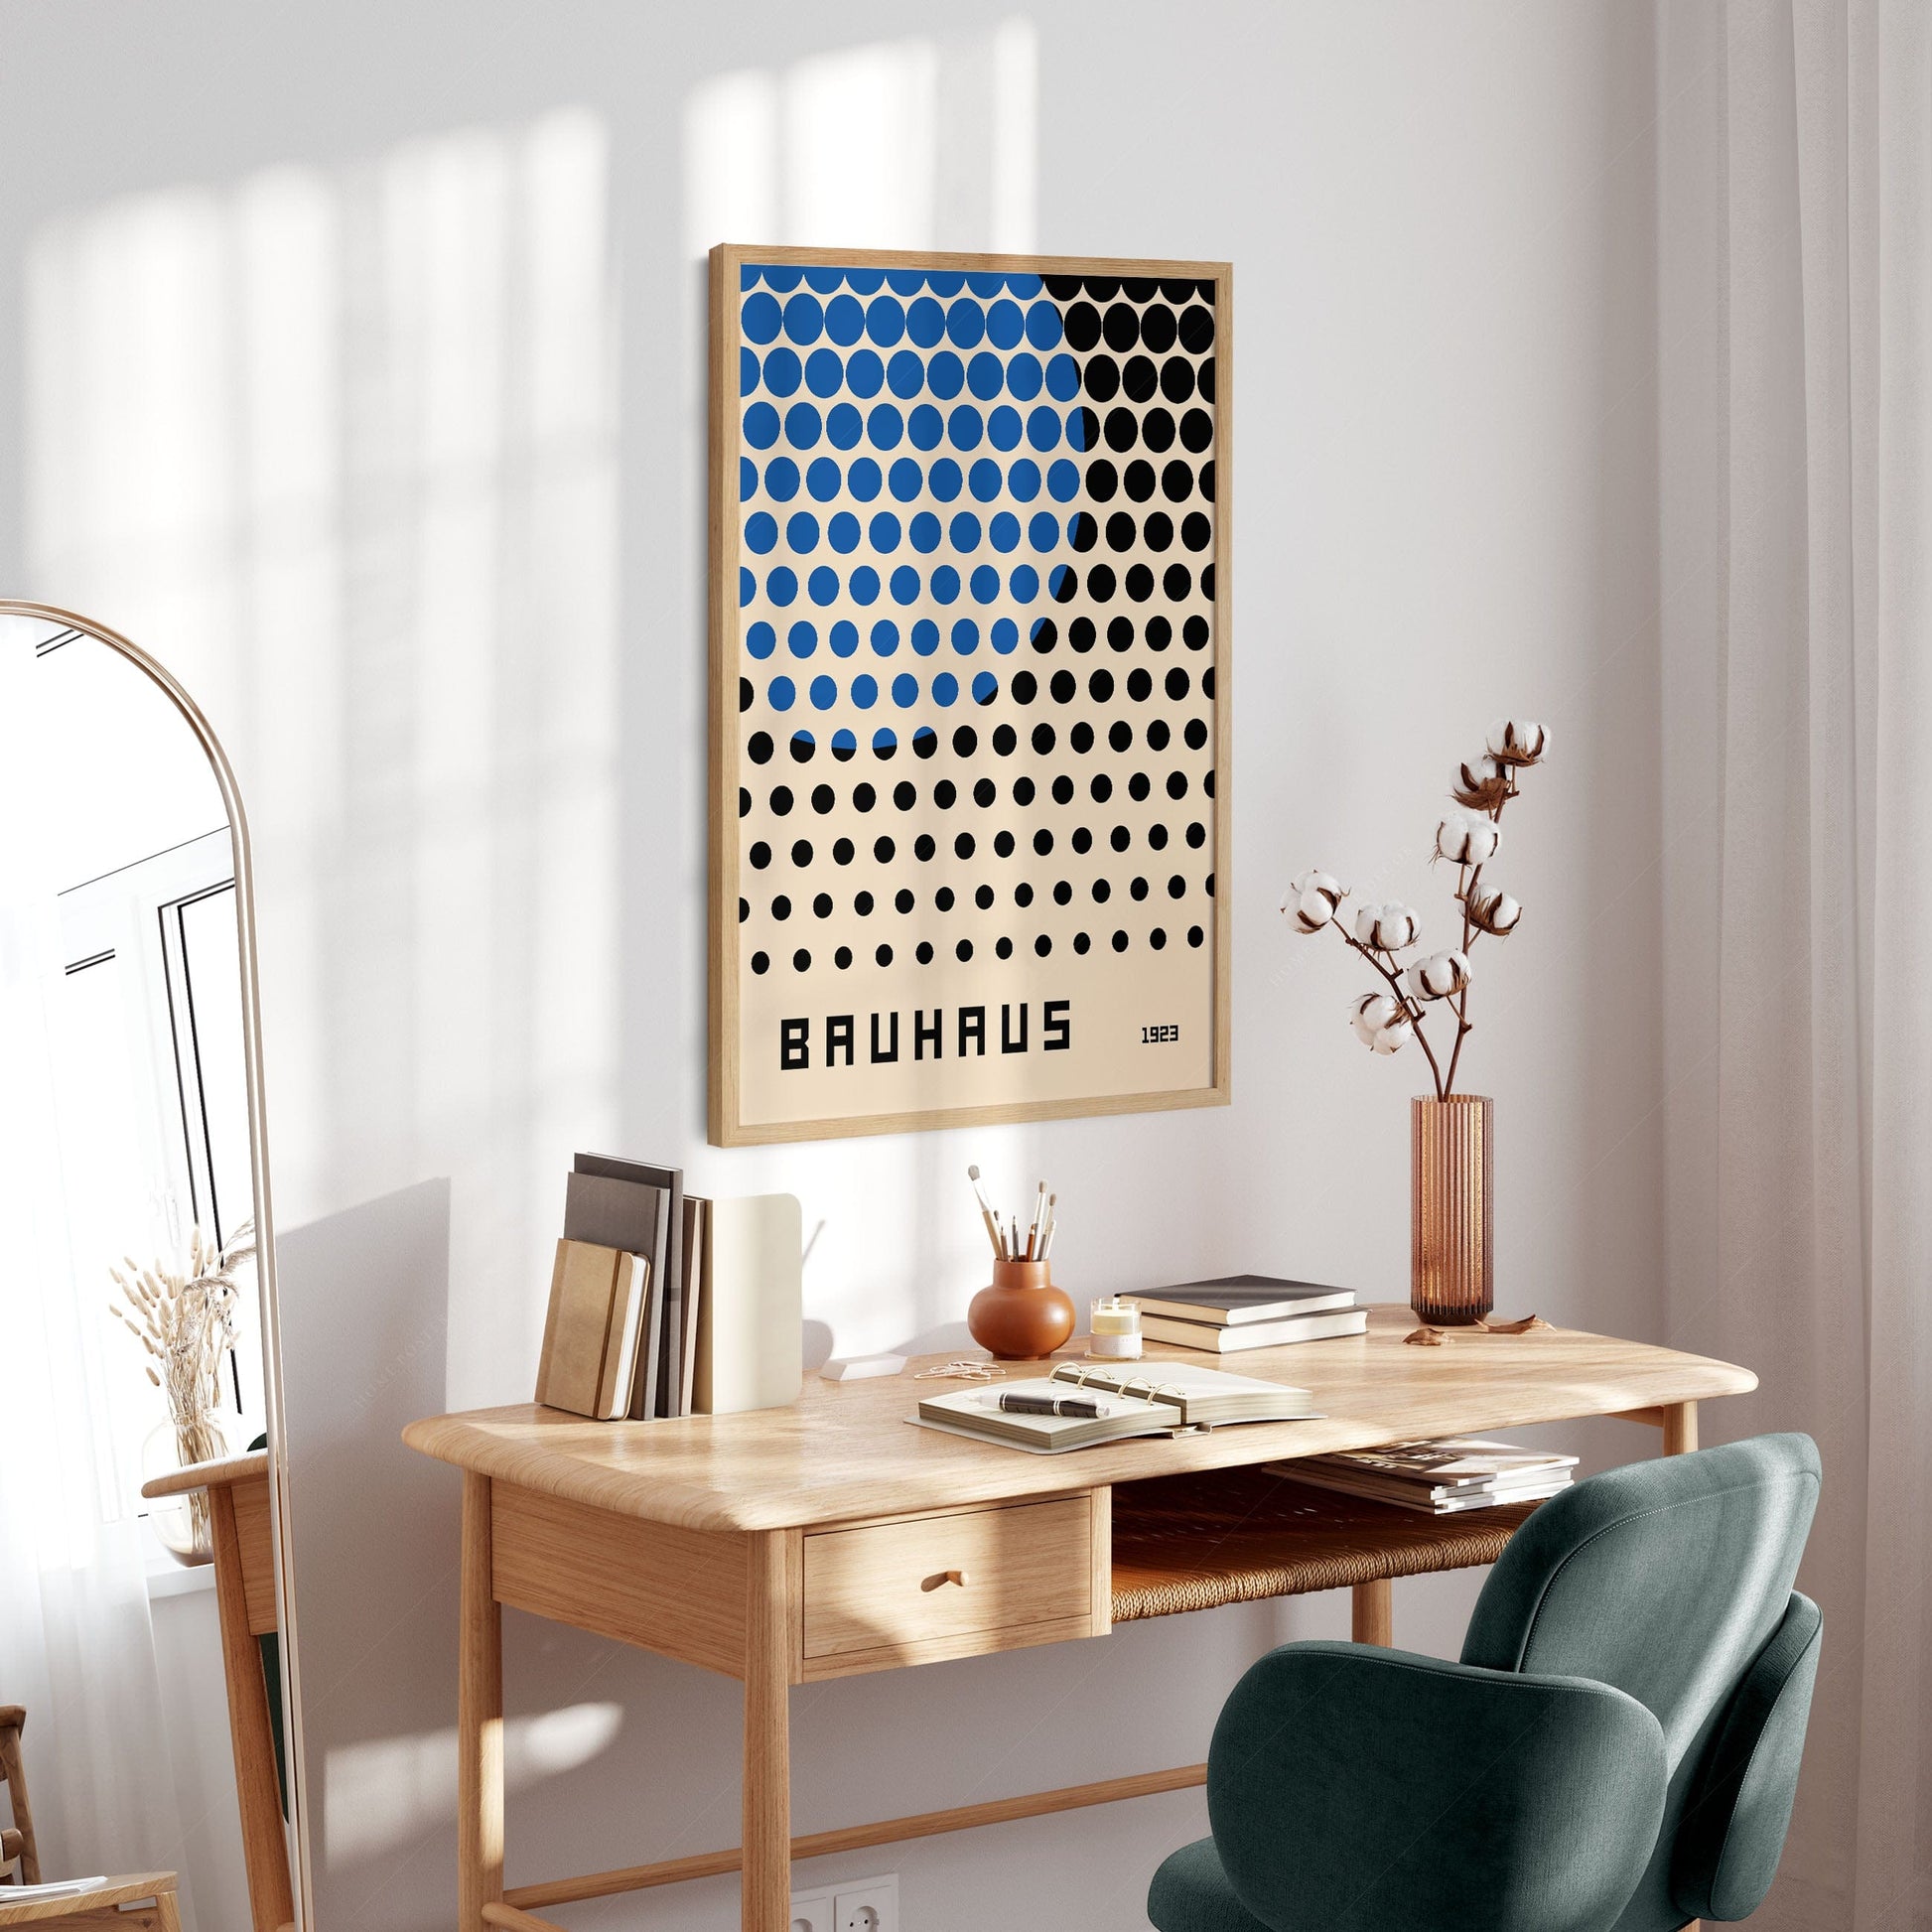 Home Poster Decor Single Mid Century Geometric Print: Abstract Wall Decor with Bauhaus and Museum Poster Aesthetics | Perfect for Office Decor and Art Exhibition